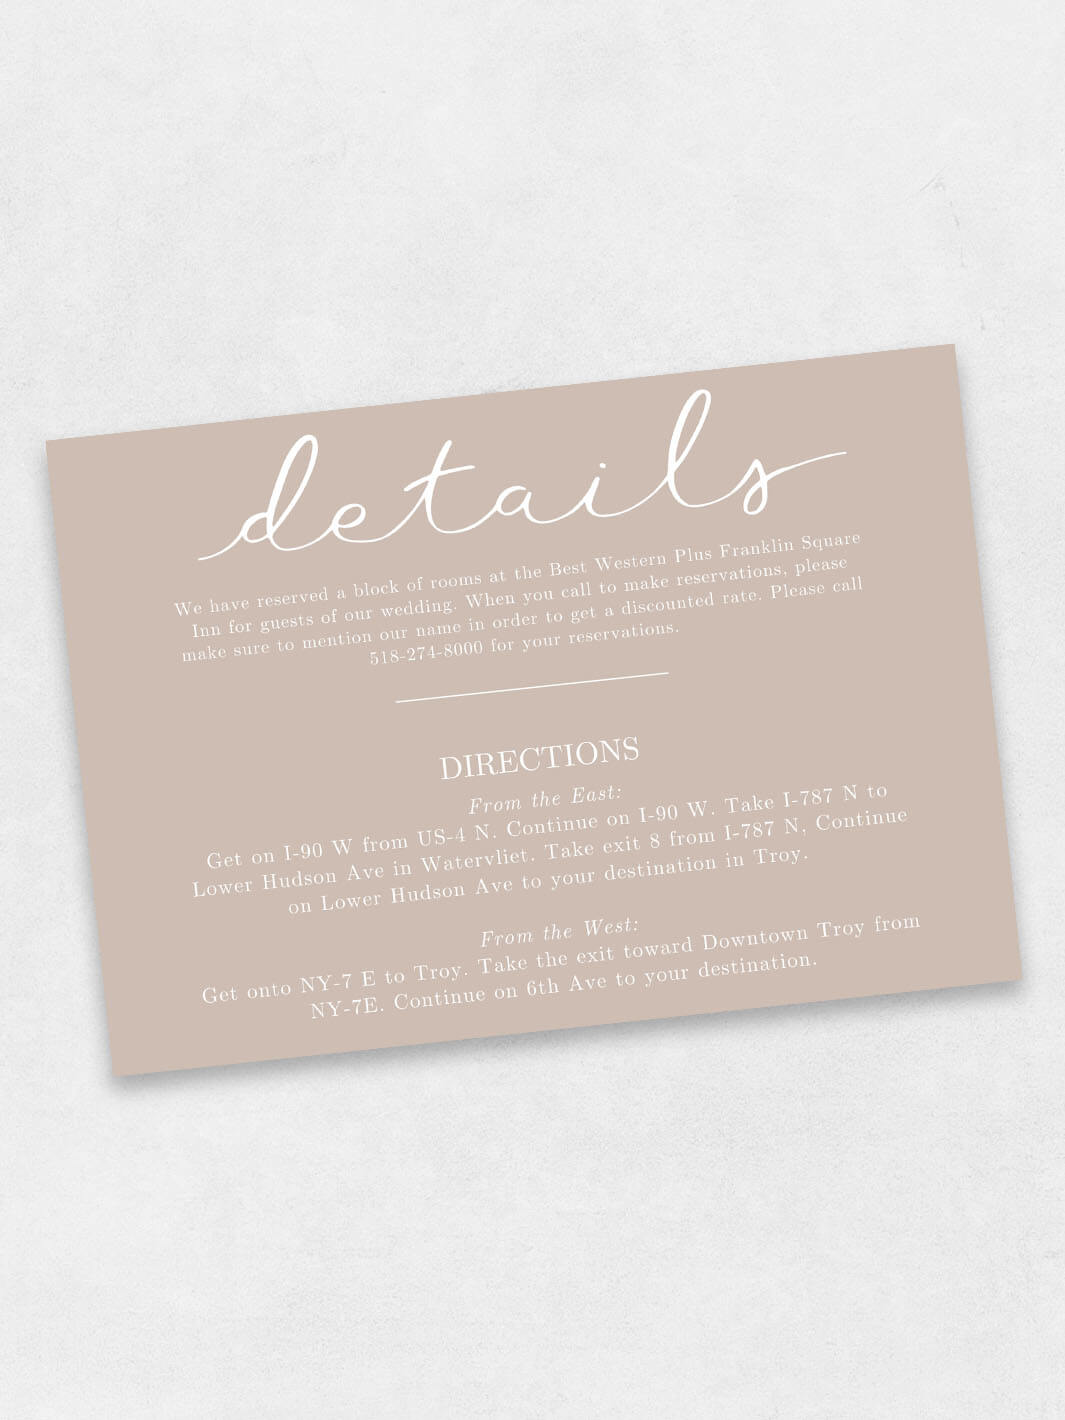 Details and Directions - Information Card